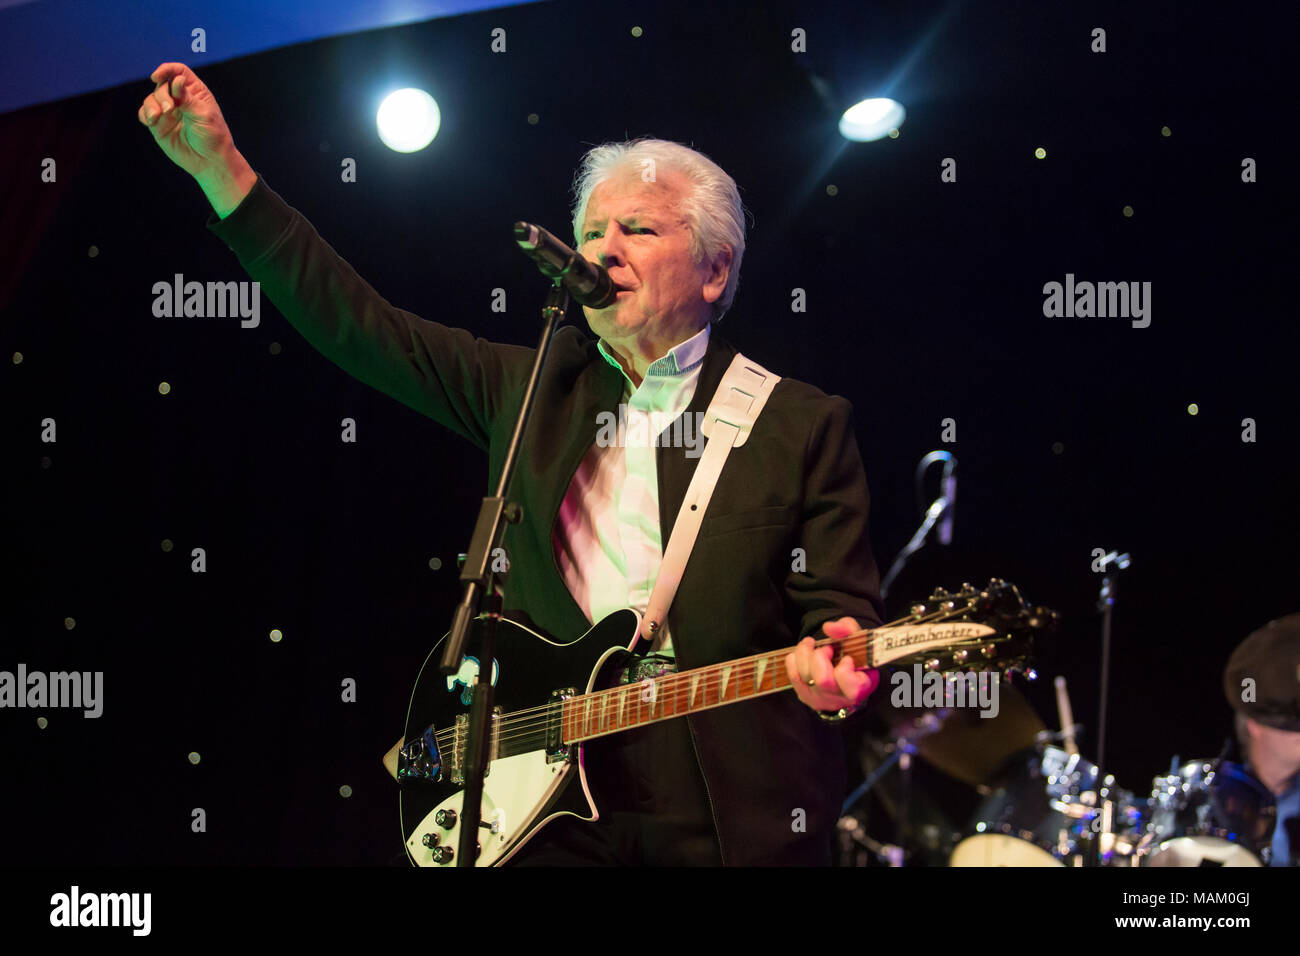 Nantwich, Cheshire, UK. 2nd April, 2018. Mike Pender from The Searchers performs live at the Nantwich Civic Hall as part of the Oh Boy It's the non-stop Sixties show during the 22nd Nantwich Jazz, Blues and Music Festival. Credit: Simon Newbury/Alamy Live News Stock Photo